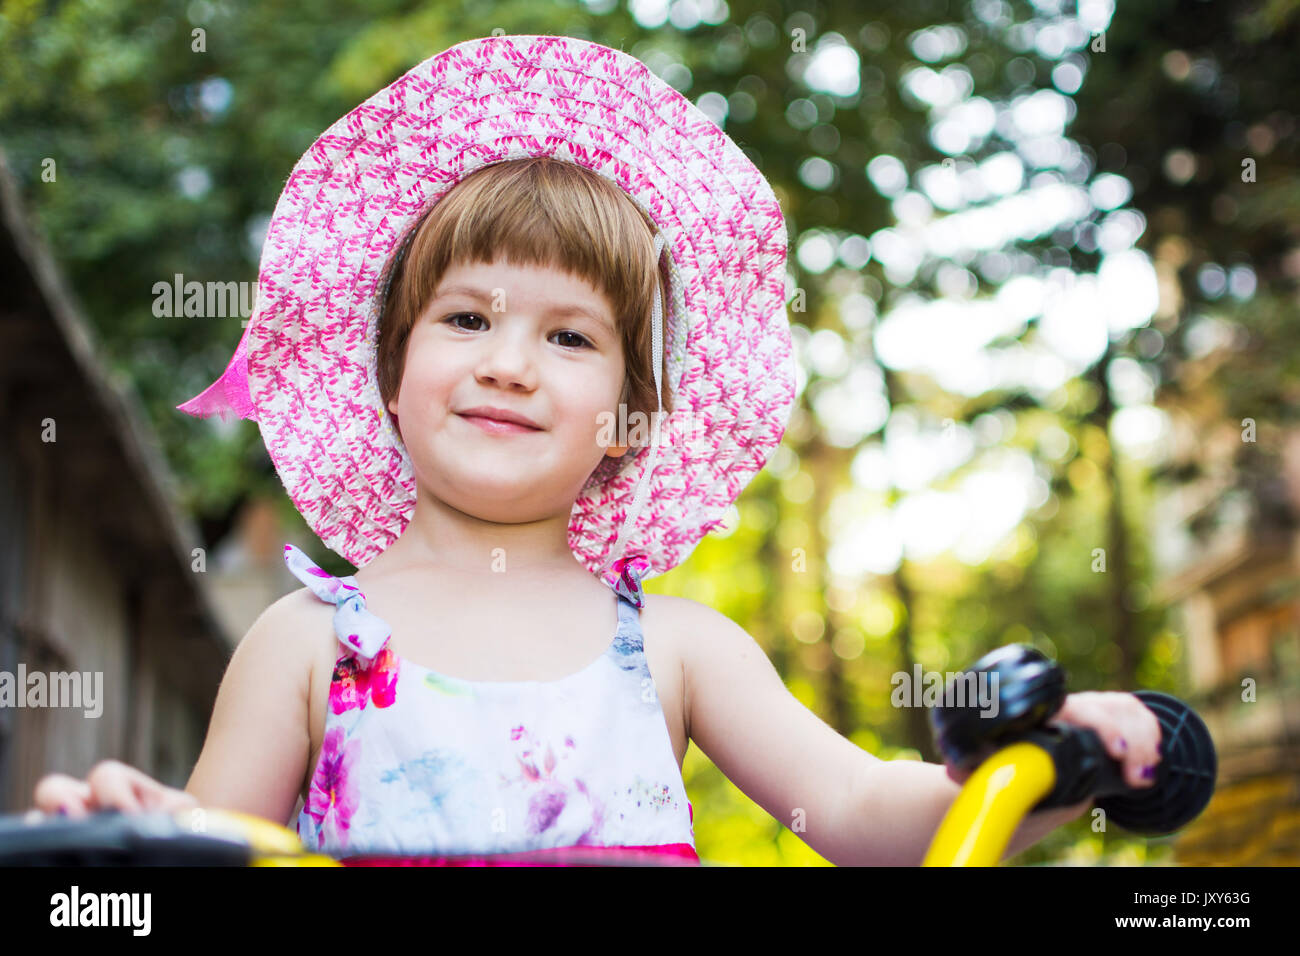 Cute girl learning to ride a bicycle outdoors Stock Photo